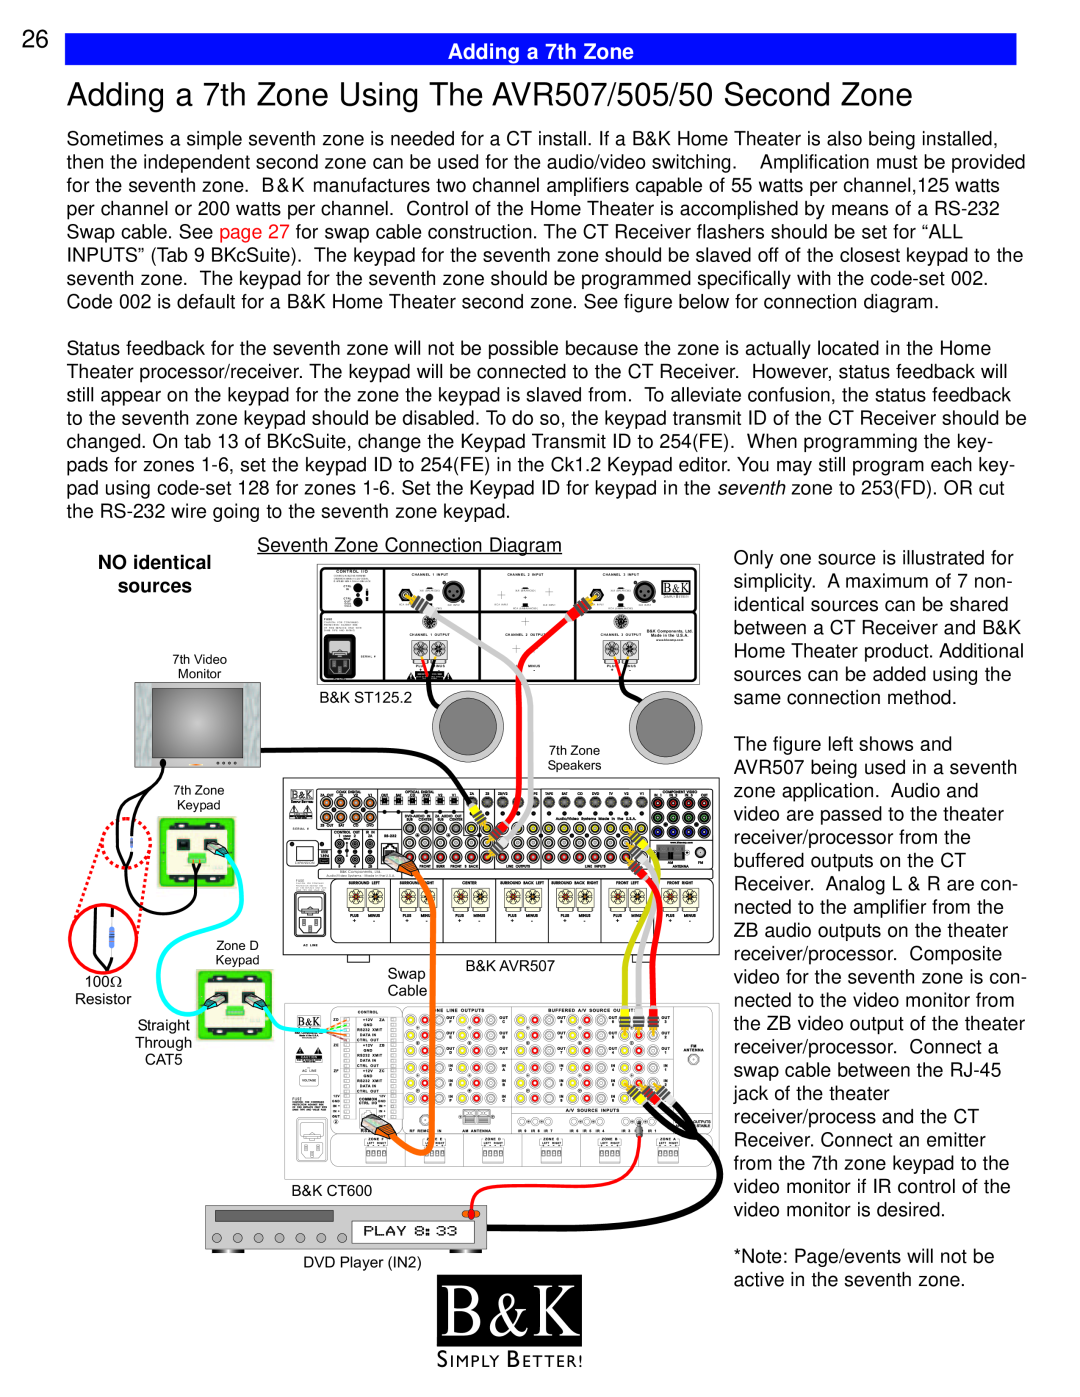 B&K CT600, CT602, CT310, CT610, CT300 user manual Adding a 7th Zone, Seventh Zone Connection Diagram, NO identical, sources 